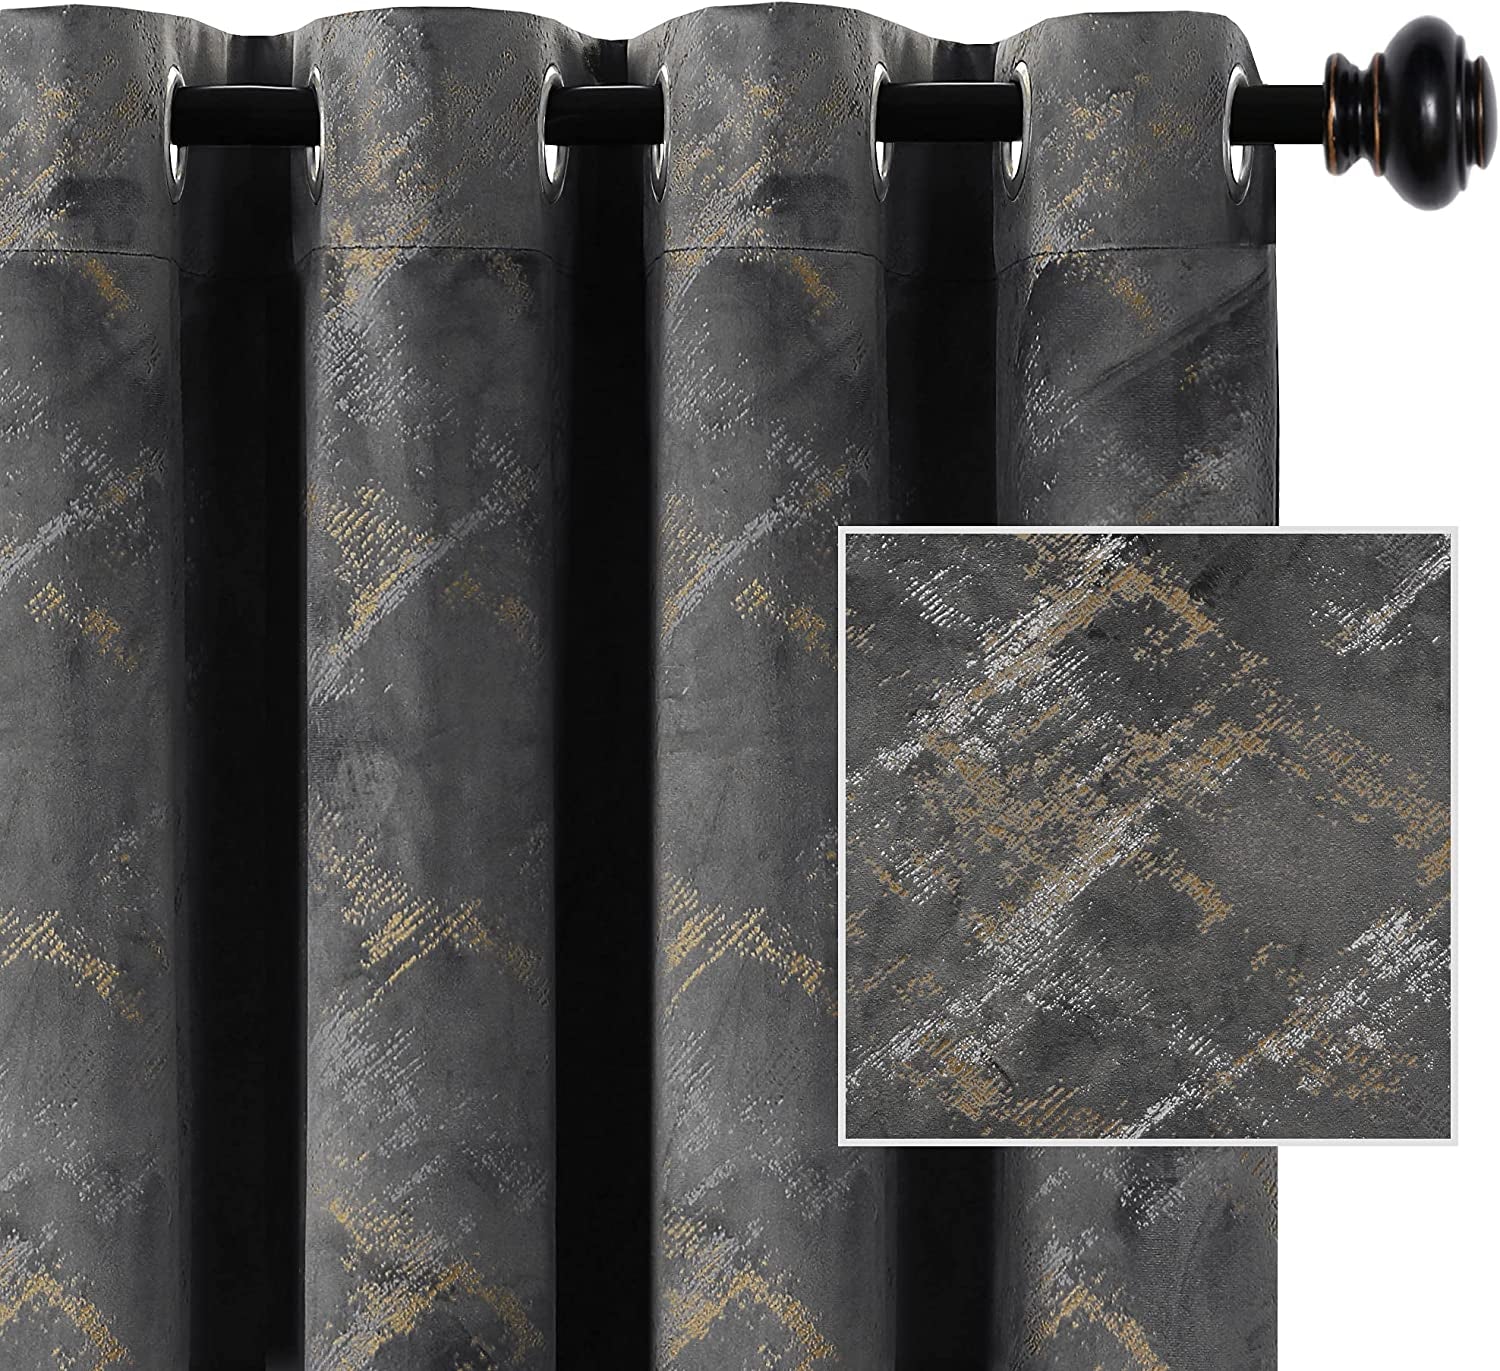 H.VERSAILTEX Luxury Velvet Curtains 84 Inches Long Thermal Insulated Blackout Curtains for Bedroom Foil Print Soft Velvet Grommet Curtain Drapes for Living Room Vintage Home Decor, 2 Panels, Ivory  H.VERSAILTEX Dark Grey 52"W X 108"L 